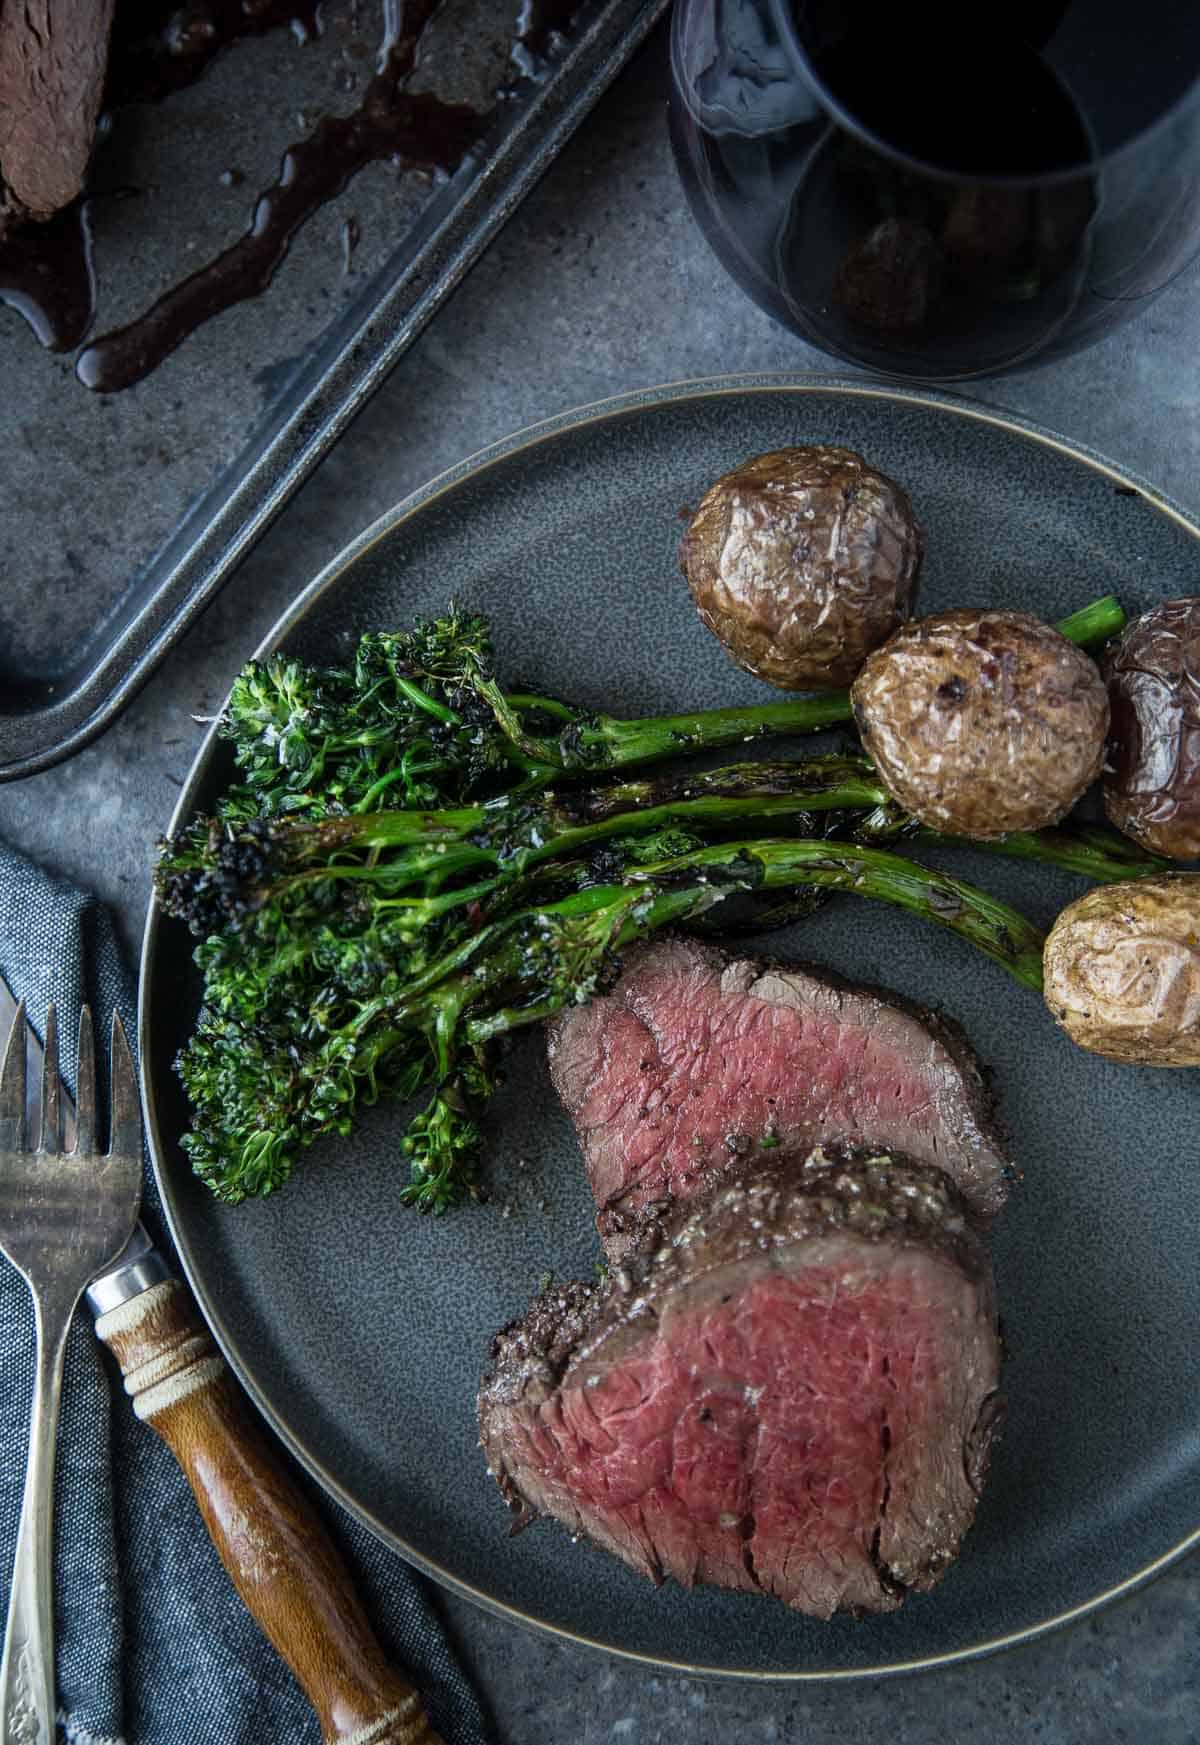 Slices of Smoked Beef Tenderloin on a plate with grilled broccolini and roasted potatoes and a glass of red wine